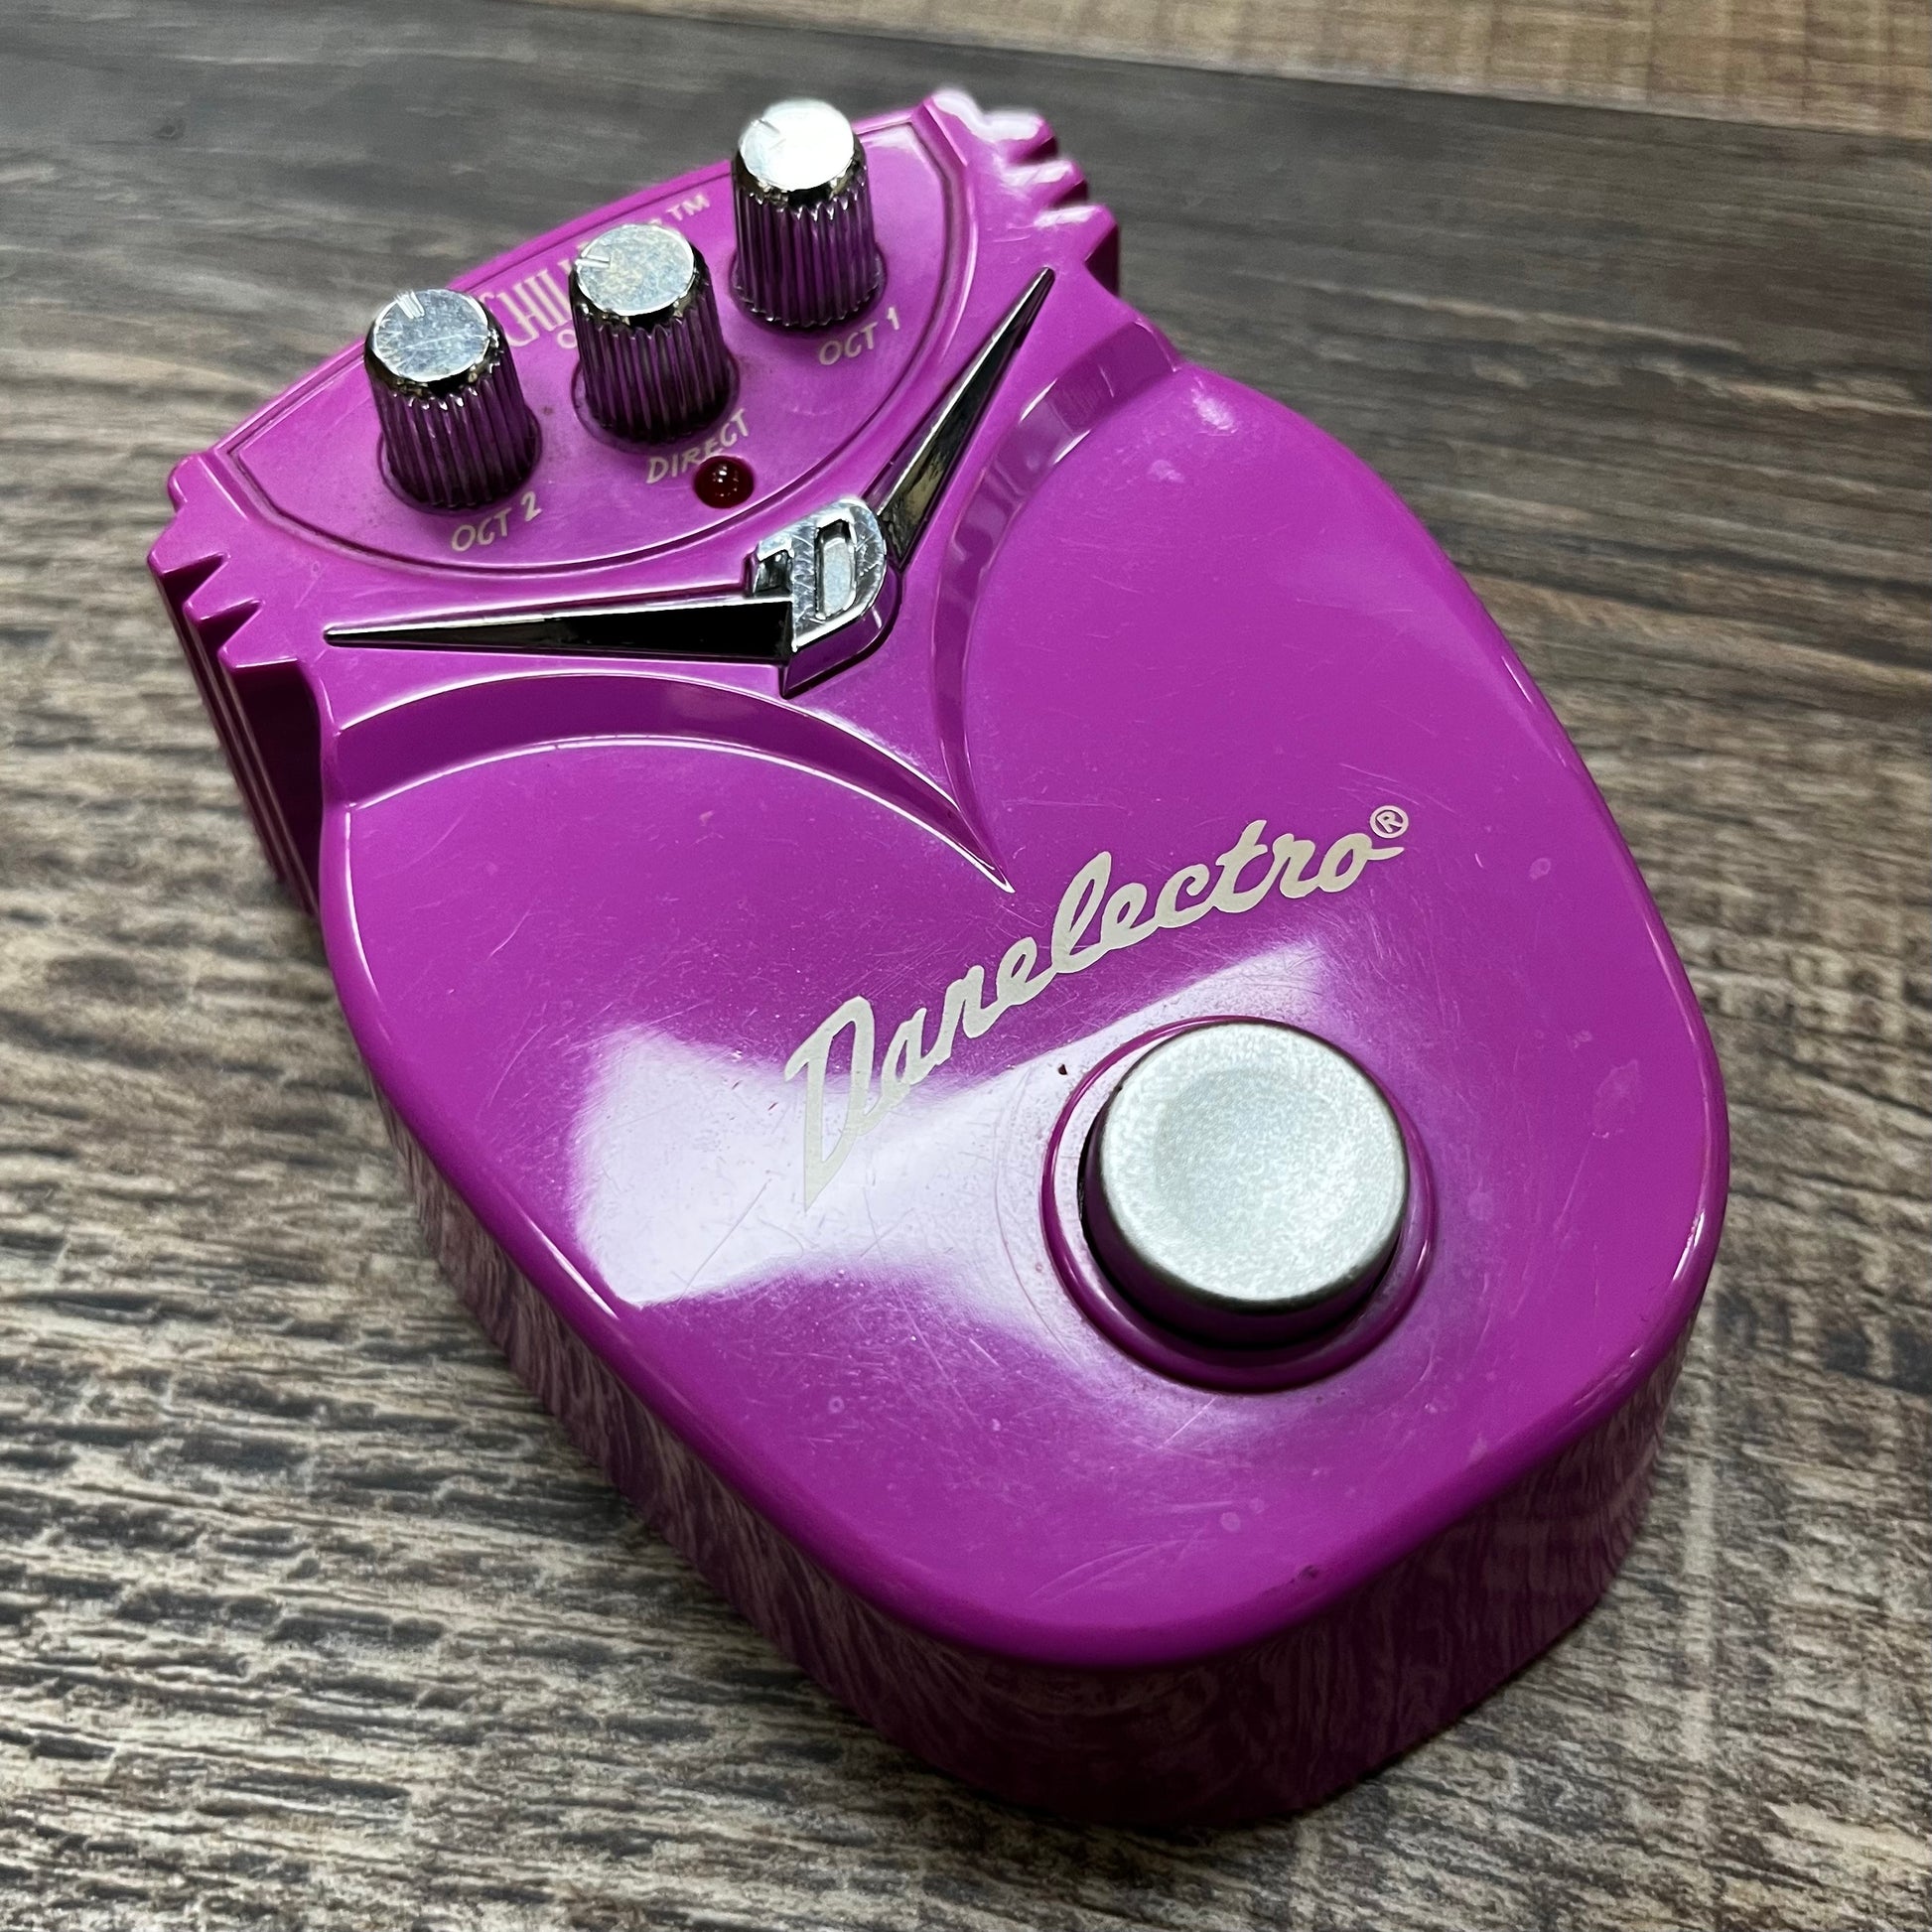 Side of Used Danelectro Chilidog Octave Pedal TFW331